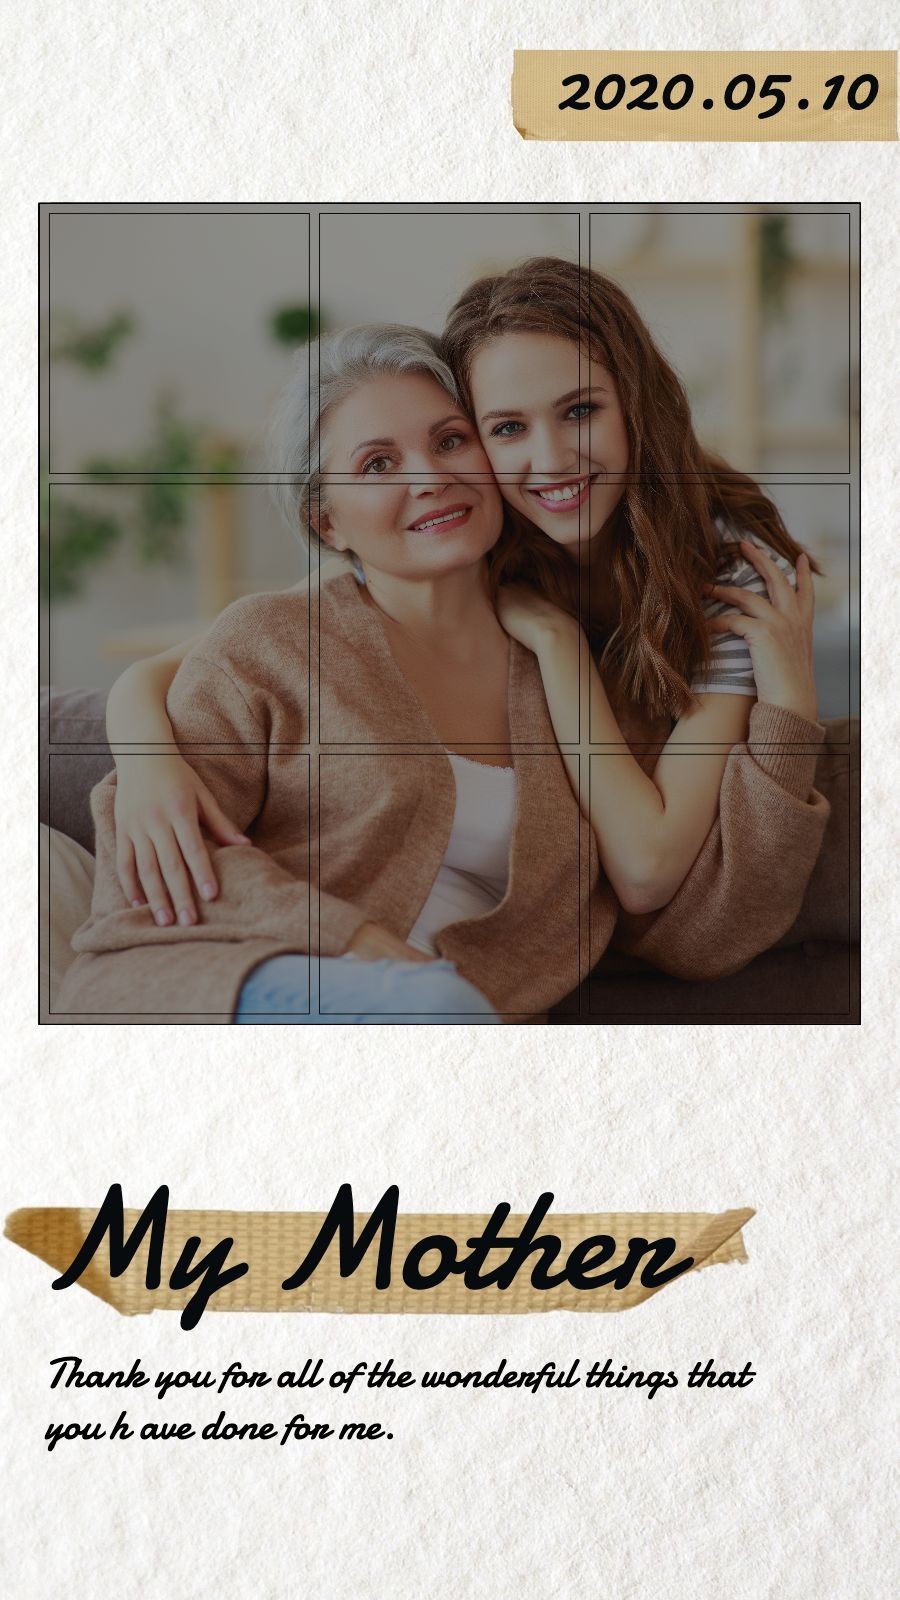 Literary Paper Background Brush Element Mother's Day Greeting Text Instagram Story